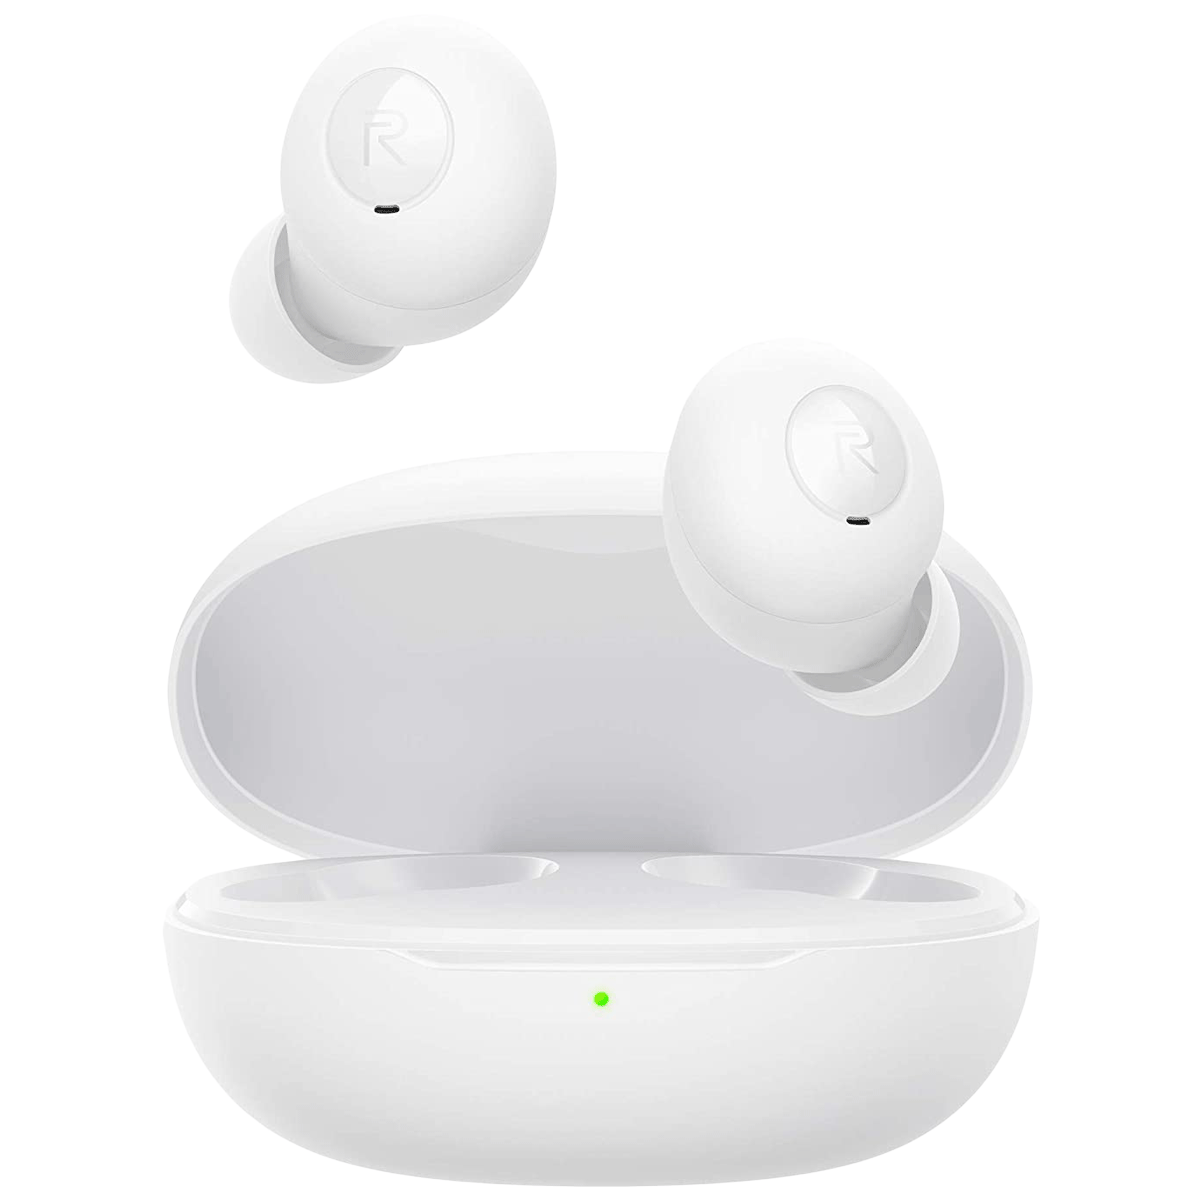 Realme Buds Q RMA215 In-Ear Truly Wireless Earbuds with Mic (Bluetooth 5.0, Intelligent Touch Controls, Quite White)_1